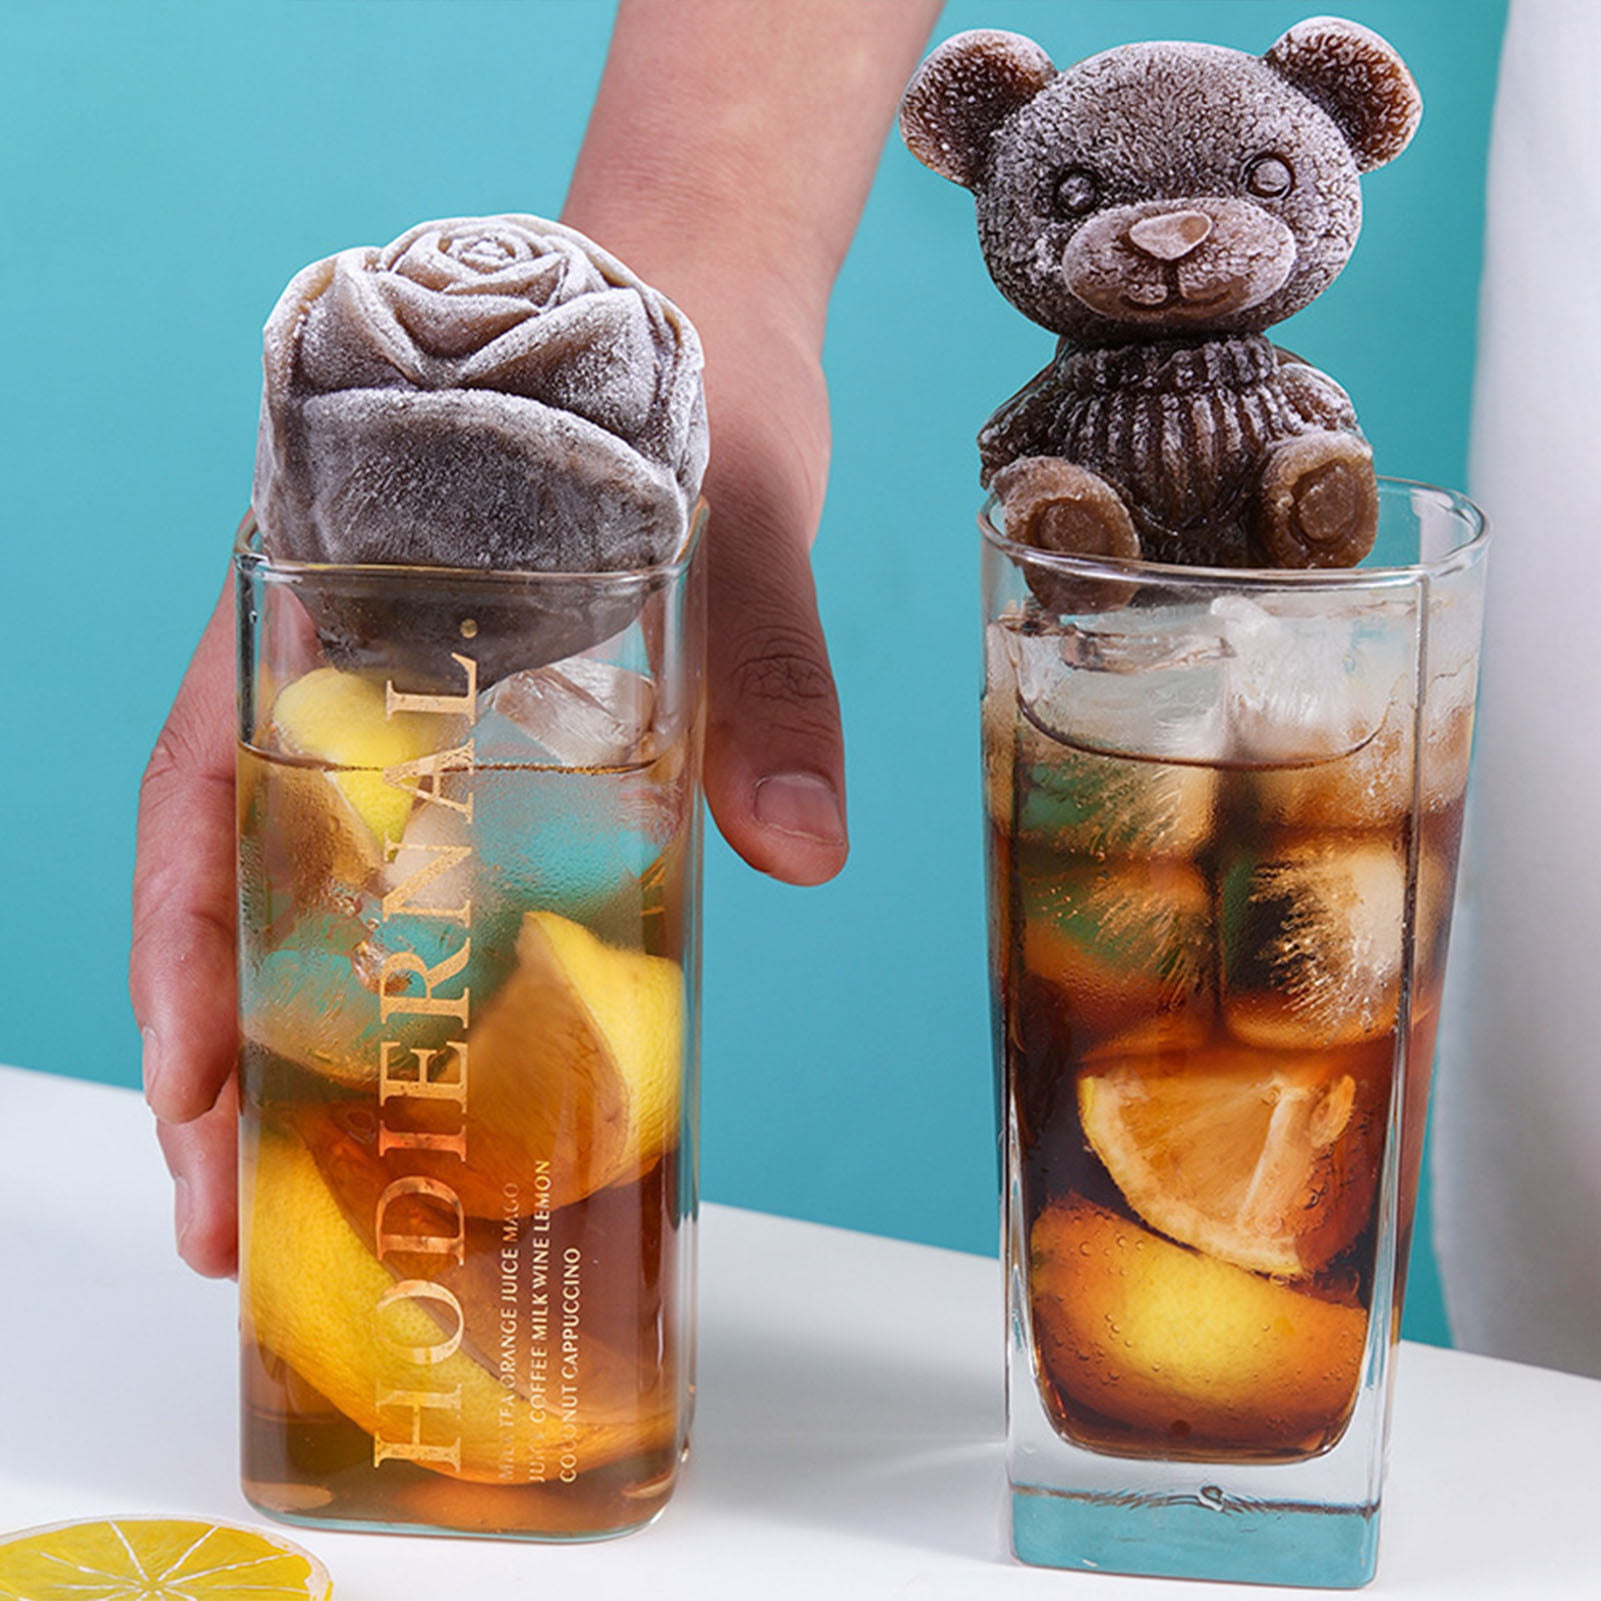 PUROSUR Bear Ice Mold 4 Pack, Ice Cube Trays Molds 3D DIY Drink Cake Decoration for Christmas, Party, Family to Make Lovely Ice Coffee, Juice, Cocktail. Candy